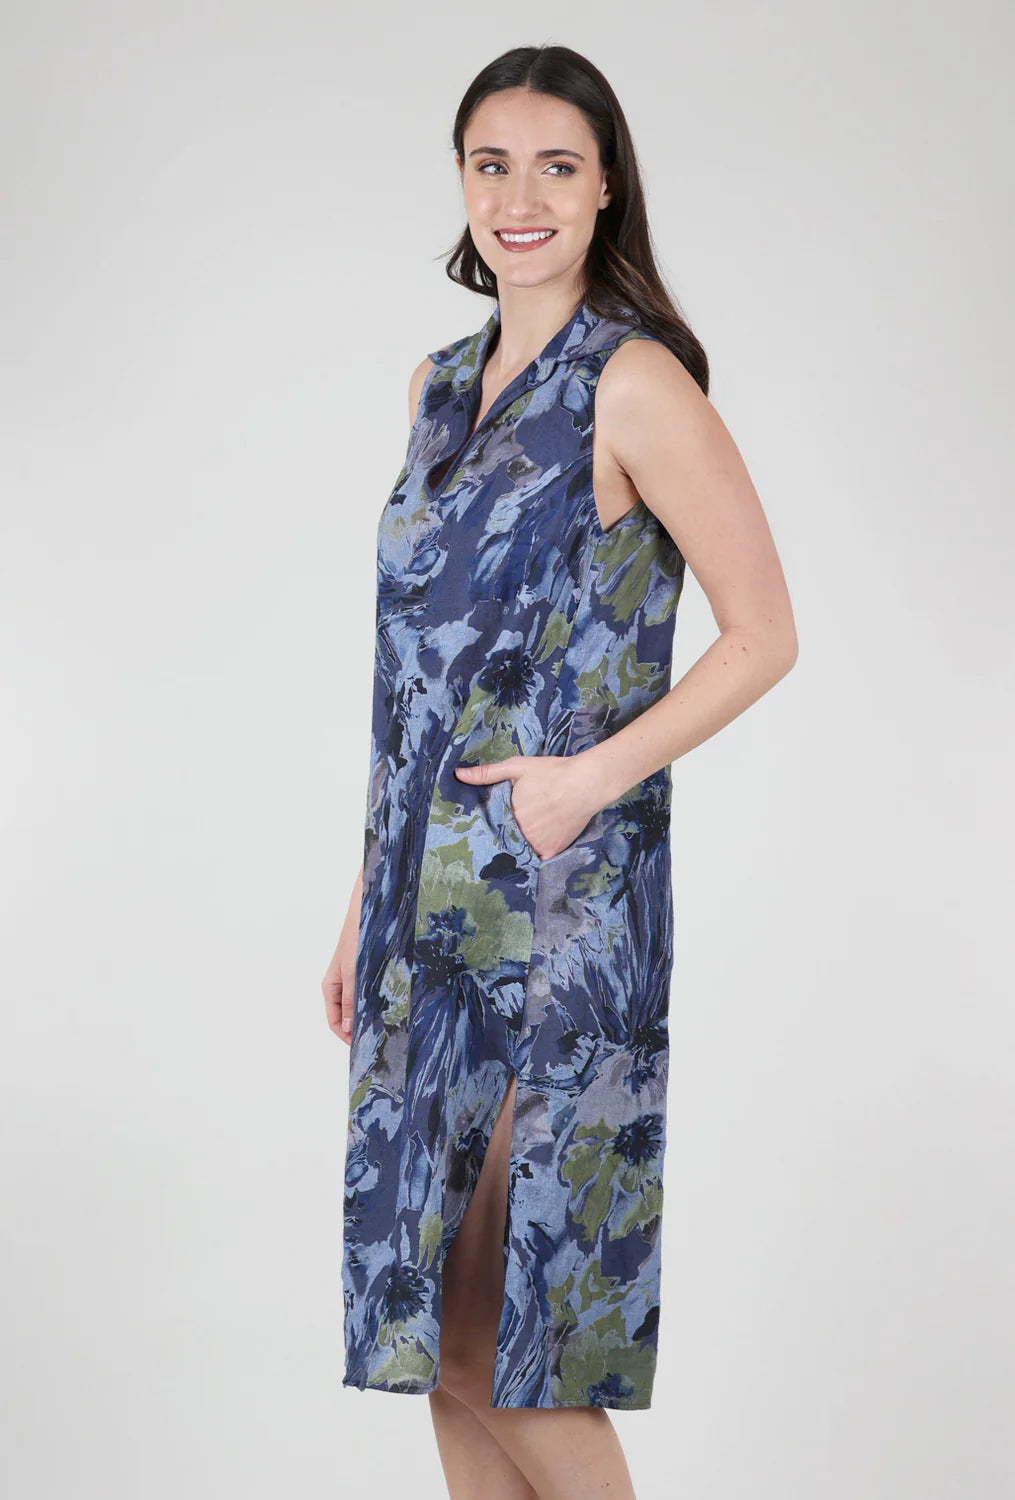 Painted Floral Linen Dress by Lands Downunder in Indigo